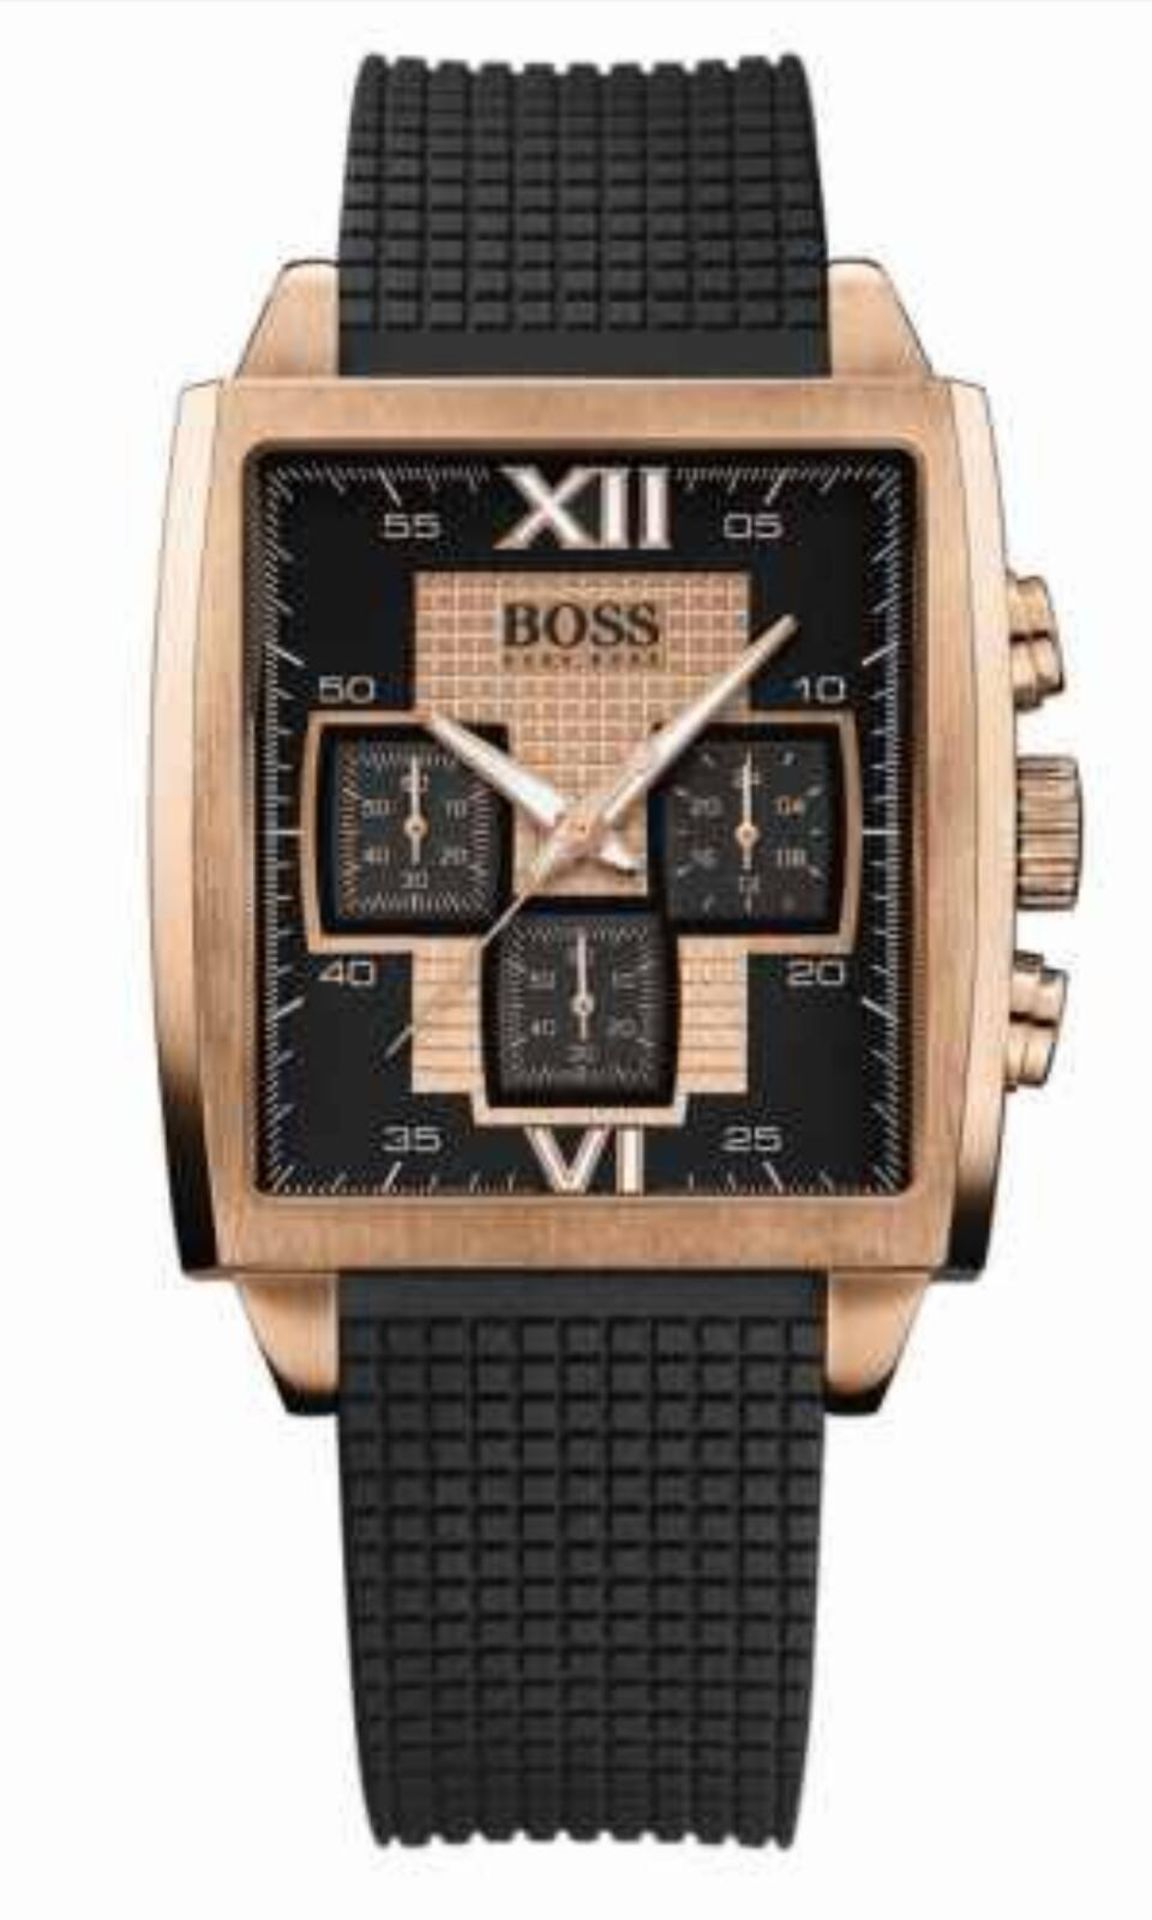 BRAND NEW HUGO BOSS 1512444, GENTS DESIGNER CHRONOGRAPH WATCH WITH ORIGINAL BOX AND BOOKLET - RRP £